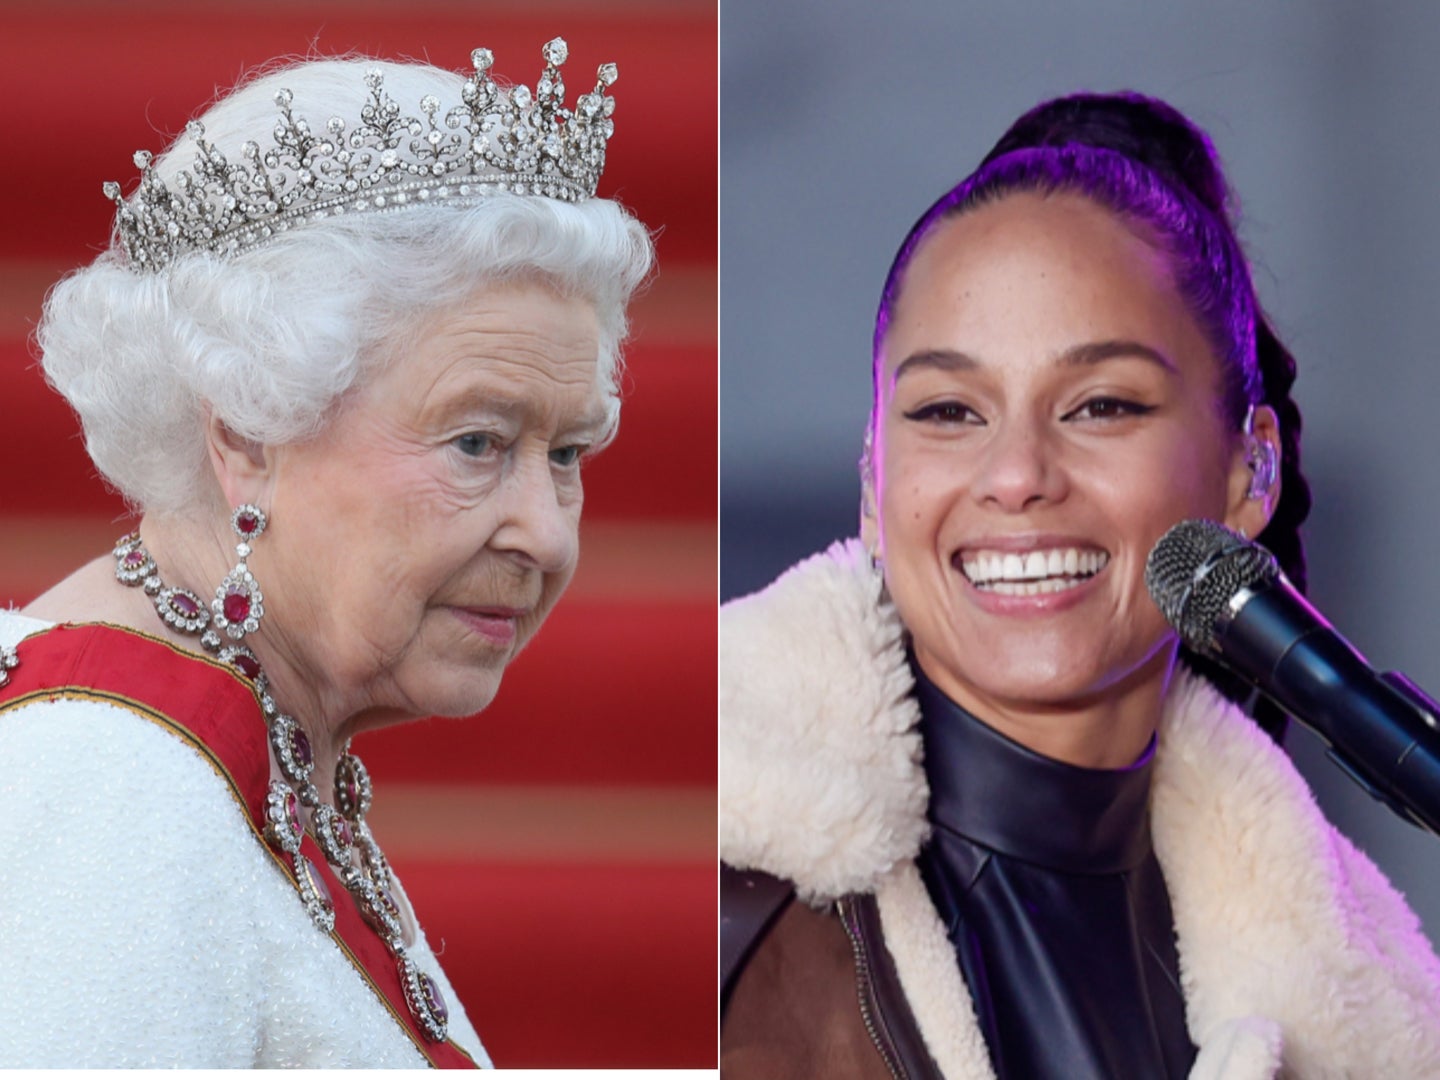 Alicia Keys is set to perform at the Jubilee concert